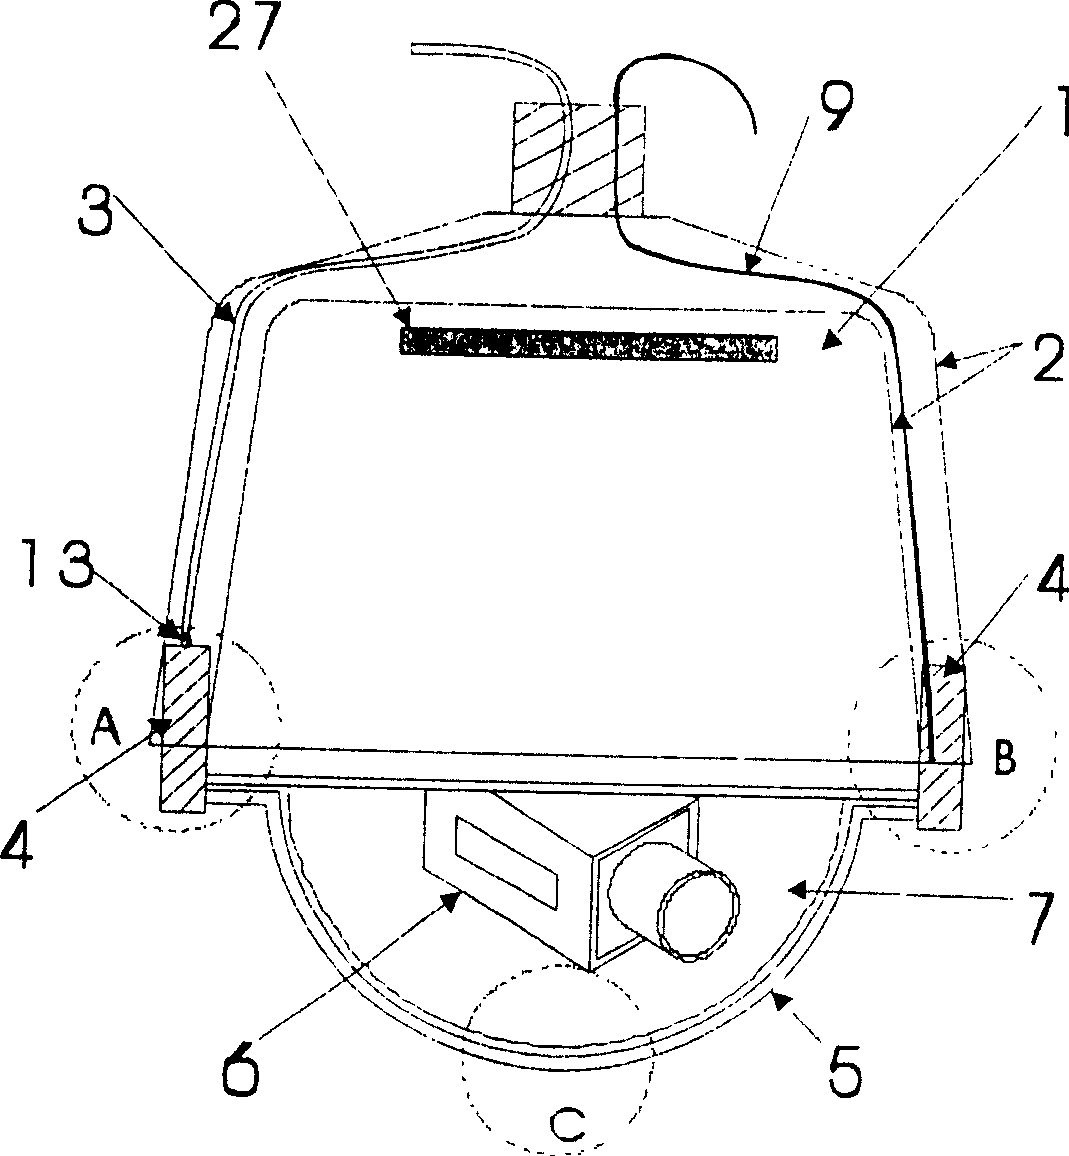 Ball-shaped camera pan-tilt with self-cleaning function